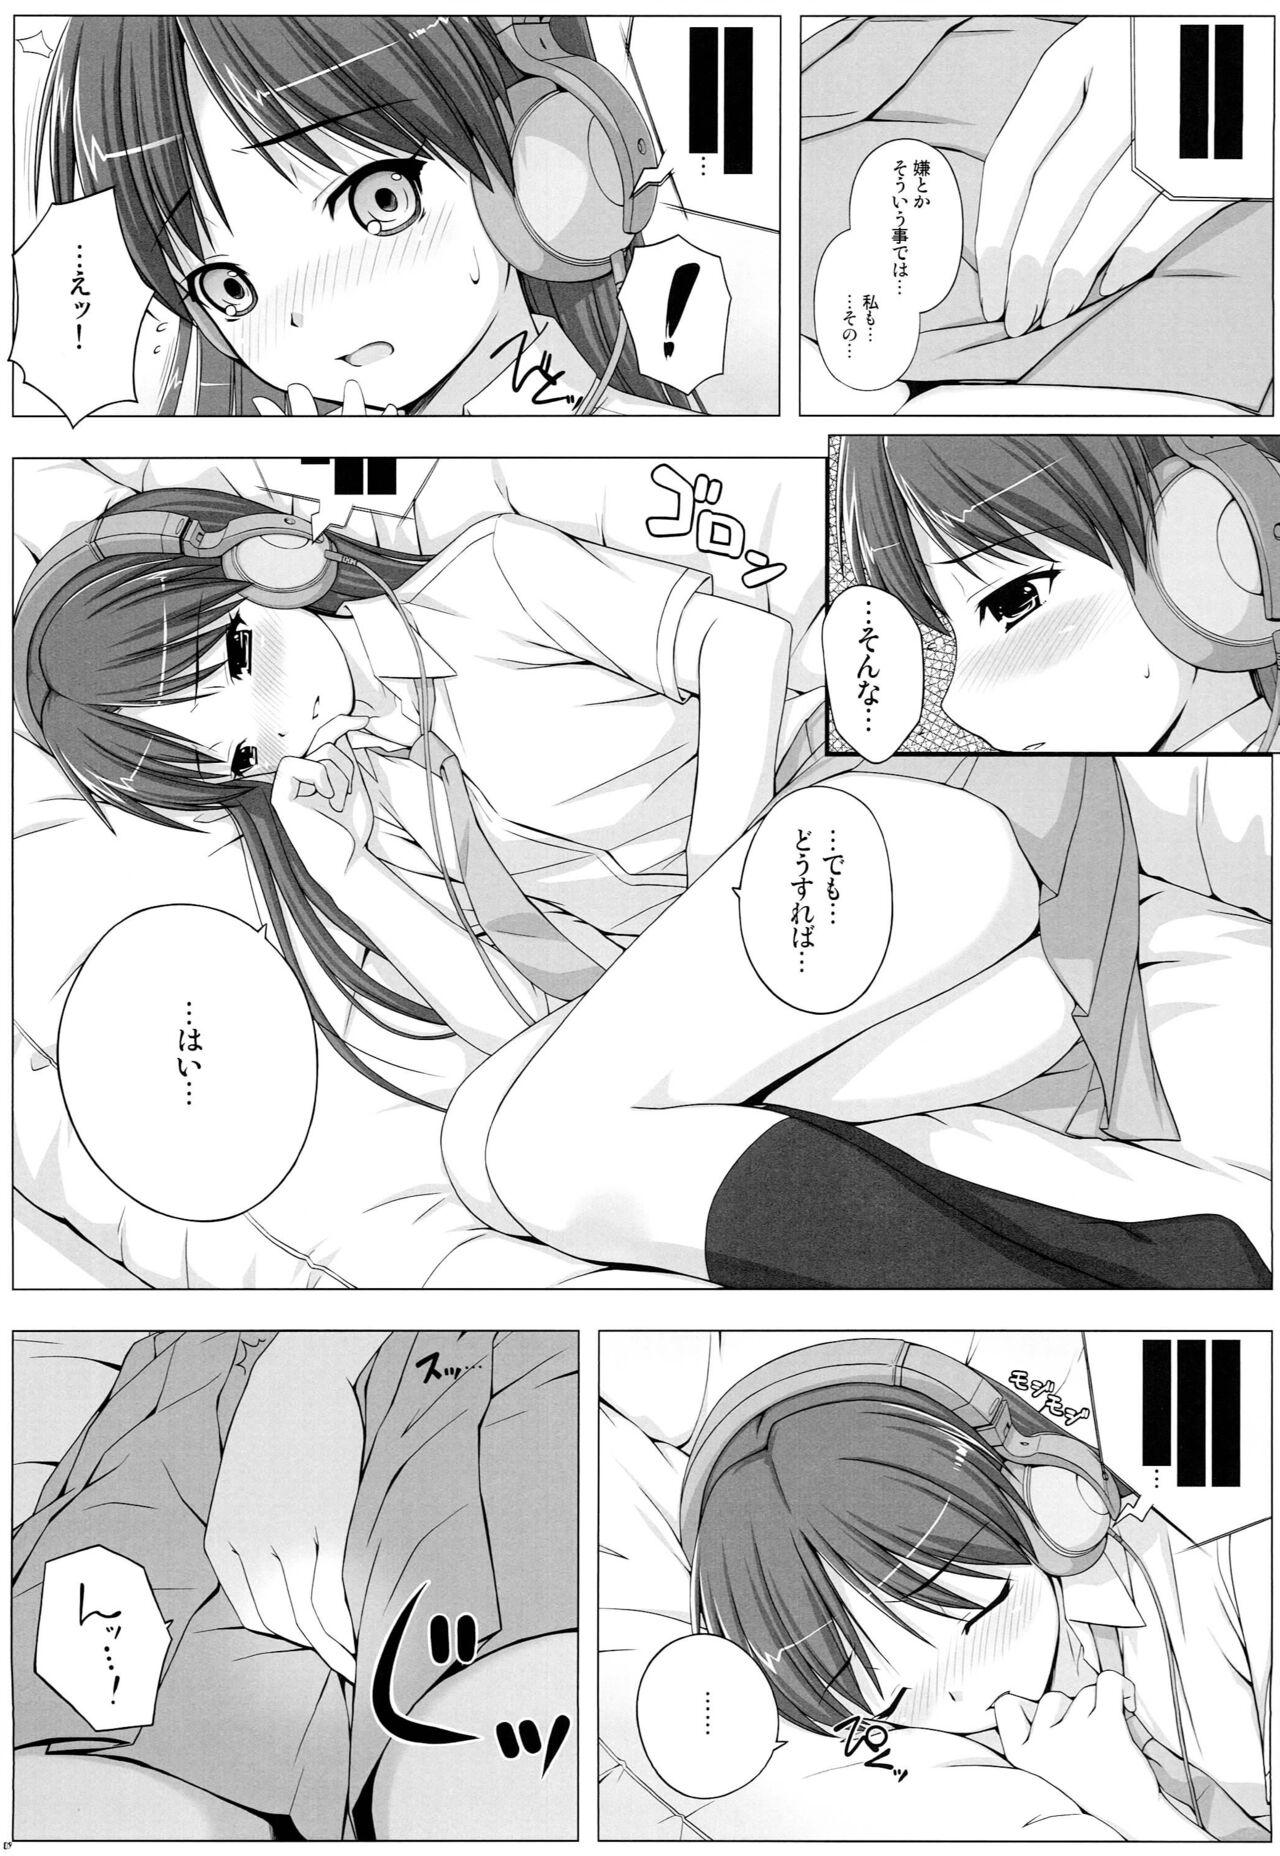 Pounding BAD COMMUNICATION? 09 - The idolmaster Parties - Page 8